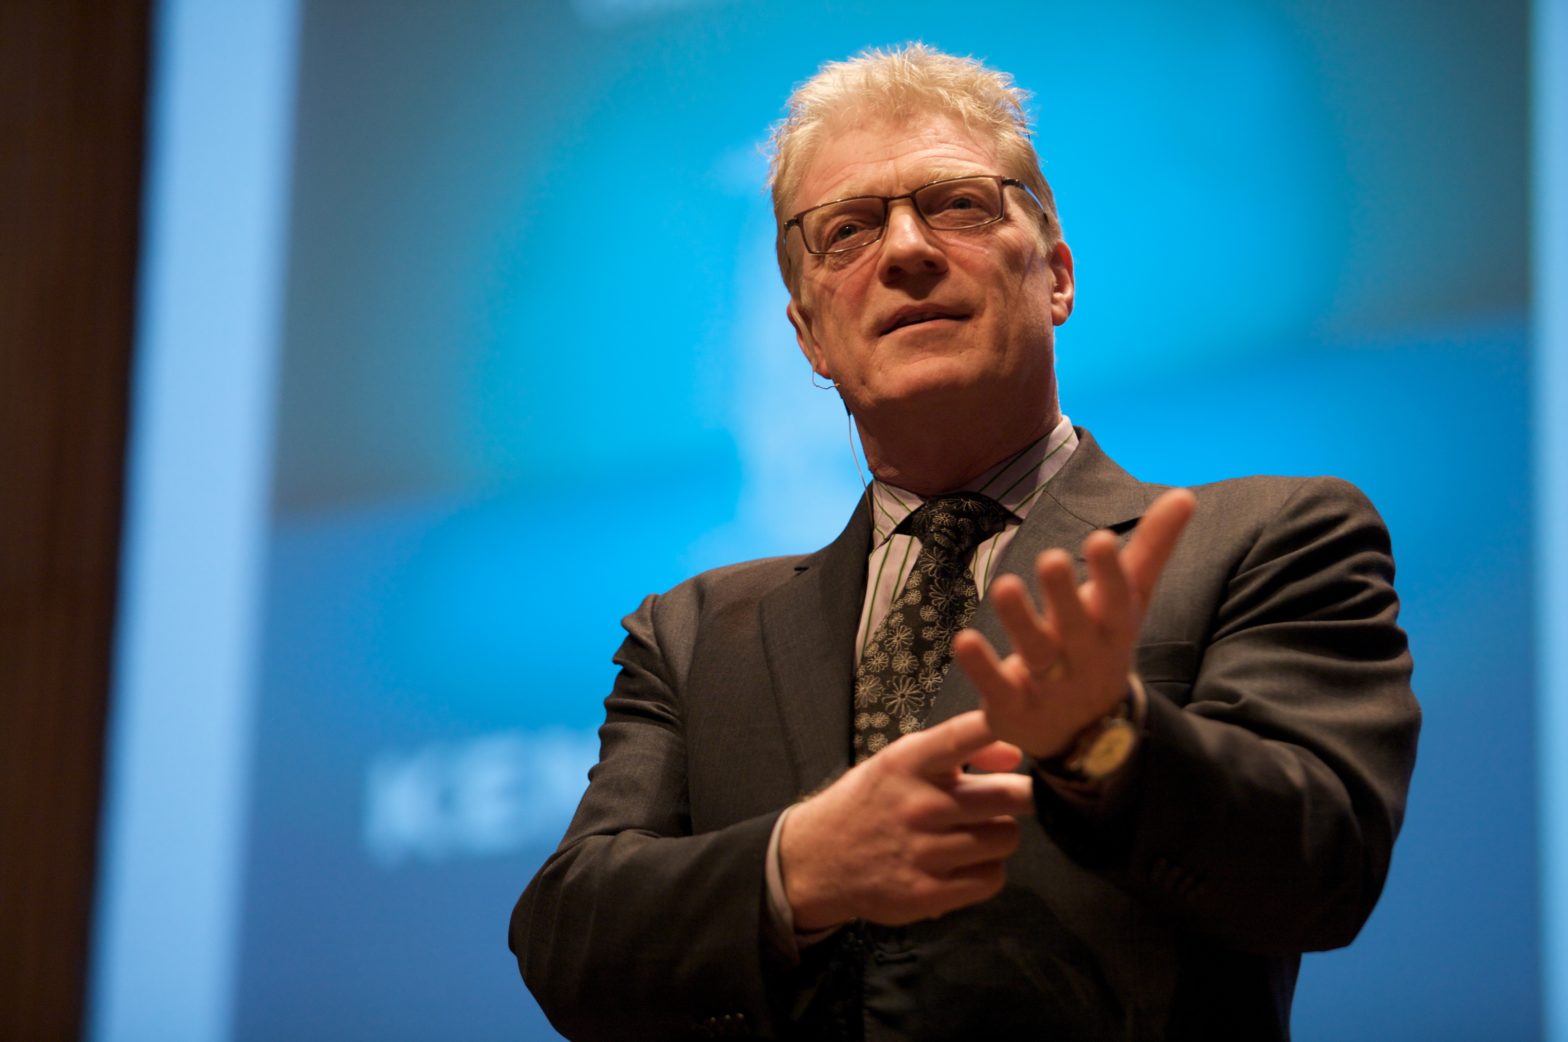 Image of Sir Ken Robinson Speaking at a conference; visible from the torso up